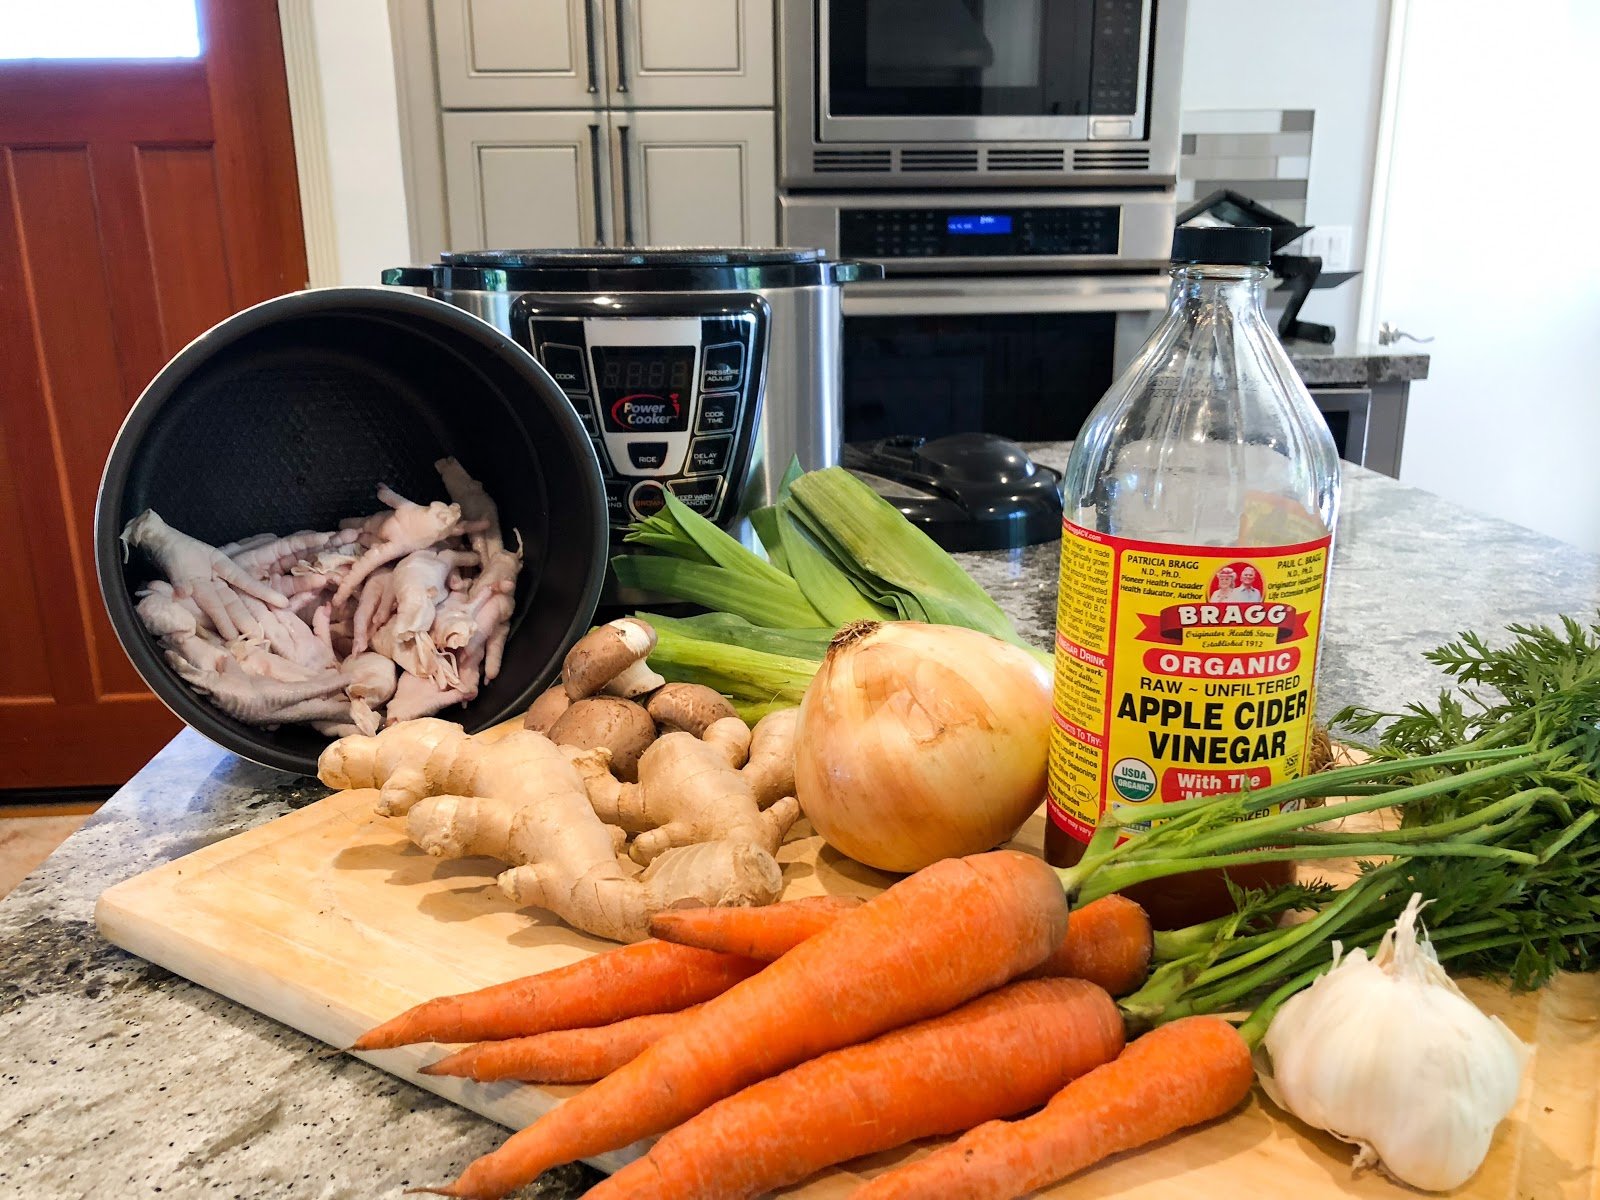 How to make instant pot bone broth: ingredients you'll need to make bone broth in 2 hours